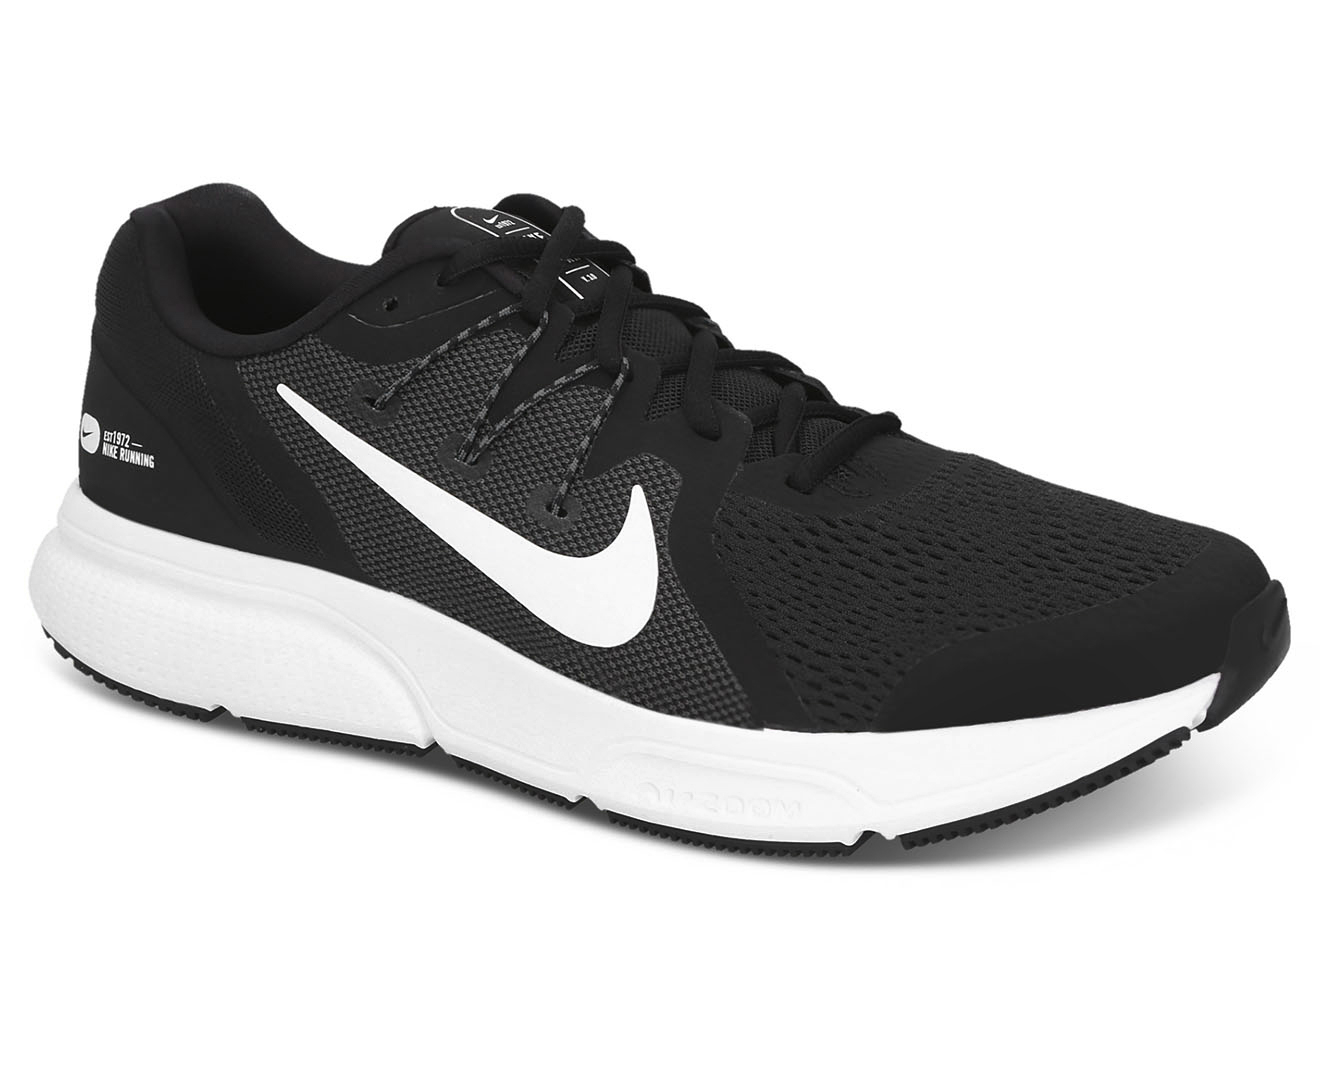 Nike Men's Zoom Span 3 Running Shoes - Black/White/Anthracite | Catch.co.nz